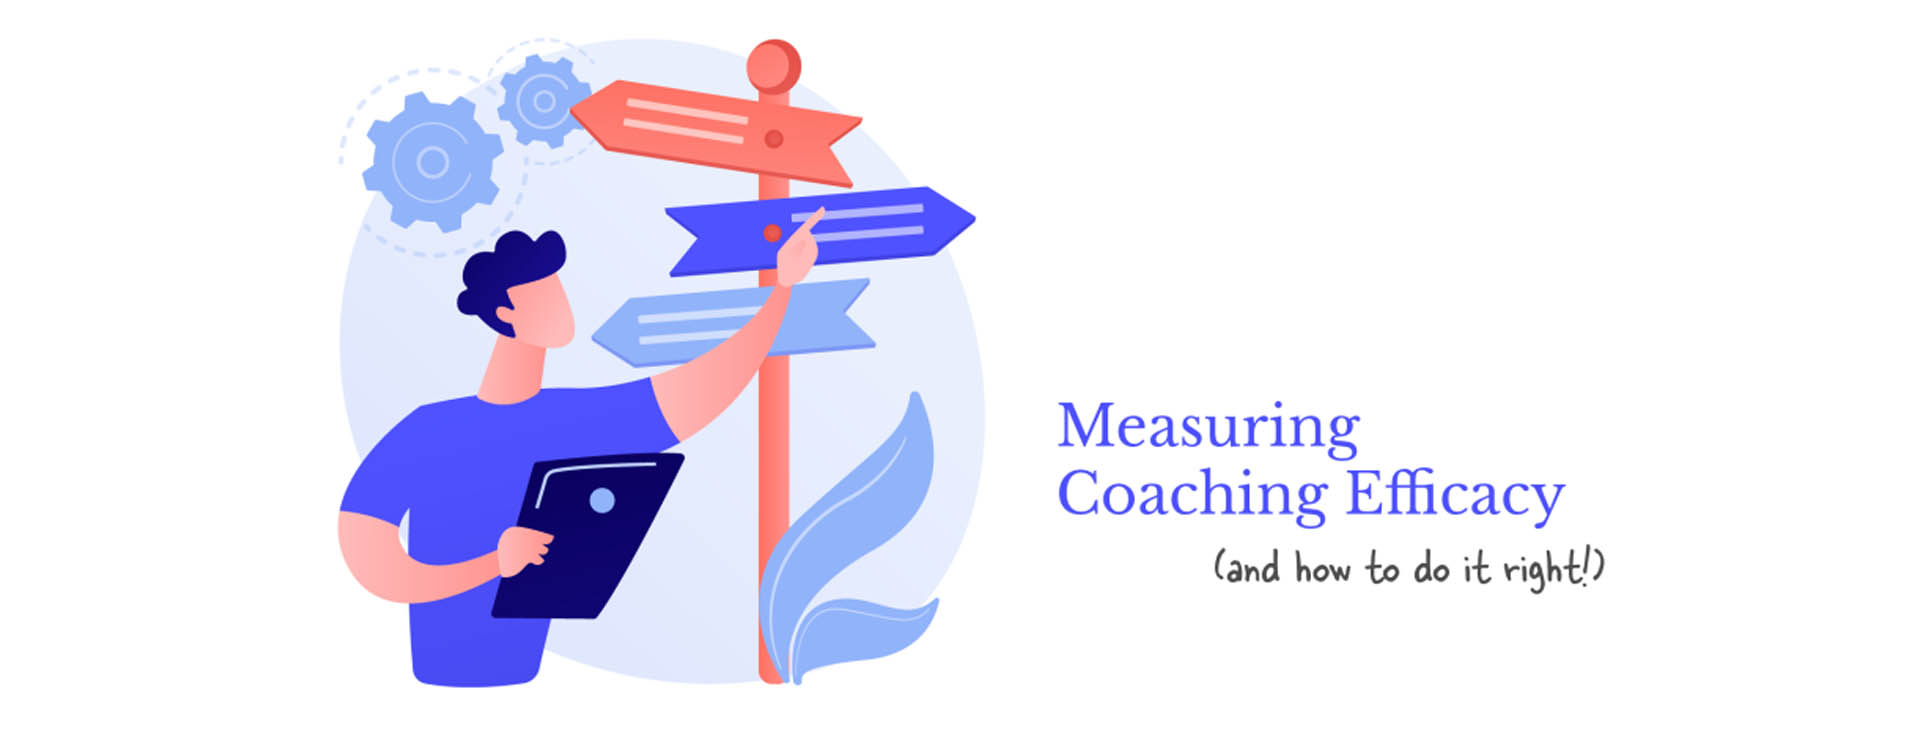 Mentoring Matters - Here’s Why You Should Measure Coaching Efficacy